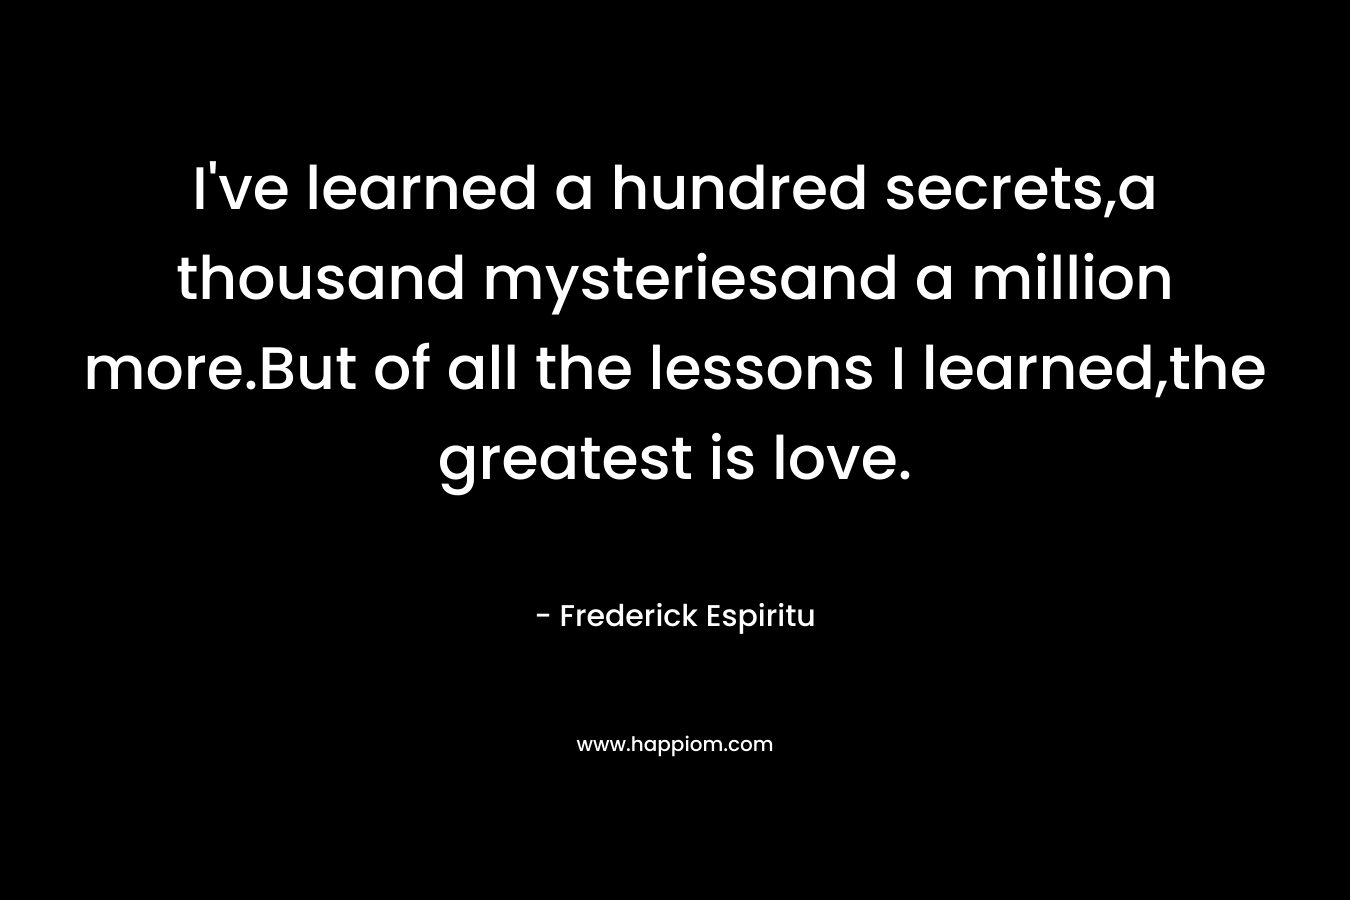 I've learned a hundred secrets,a thousand mysteriesand a million more.But of all the lessons I learned,the greatest is love.